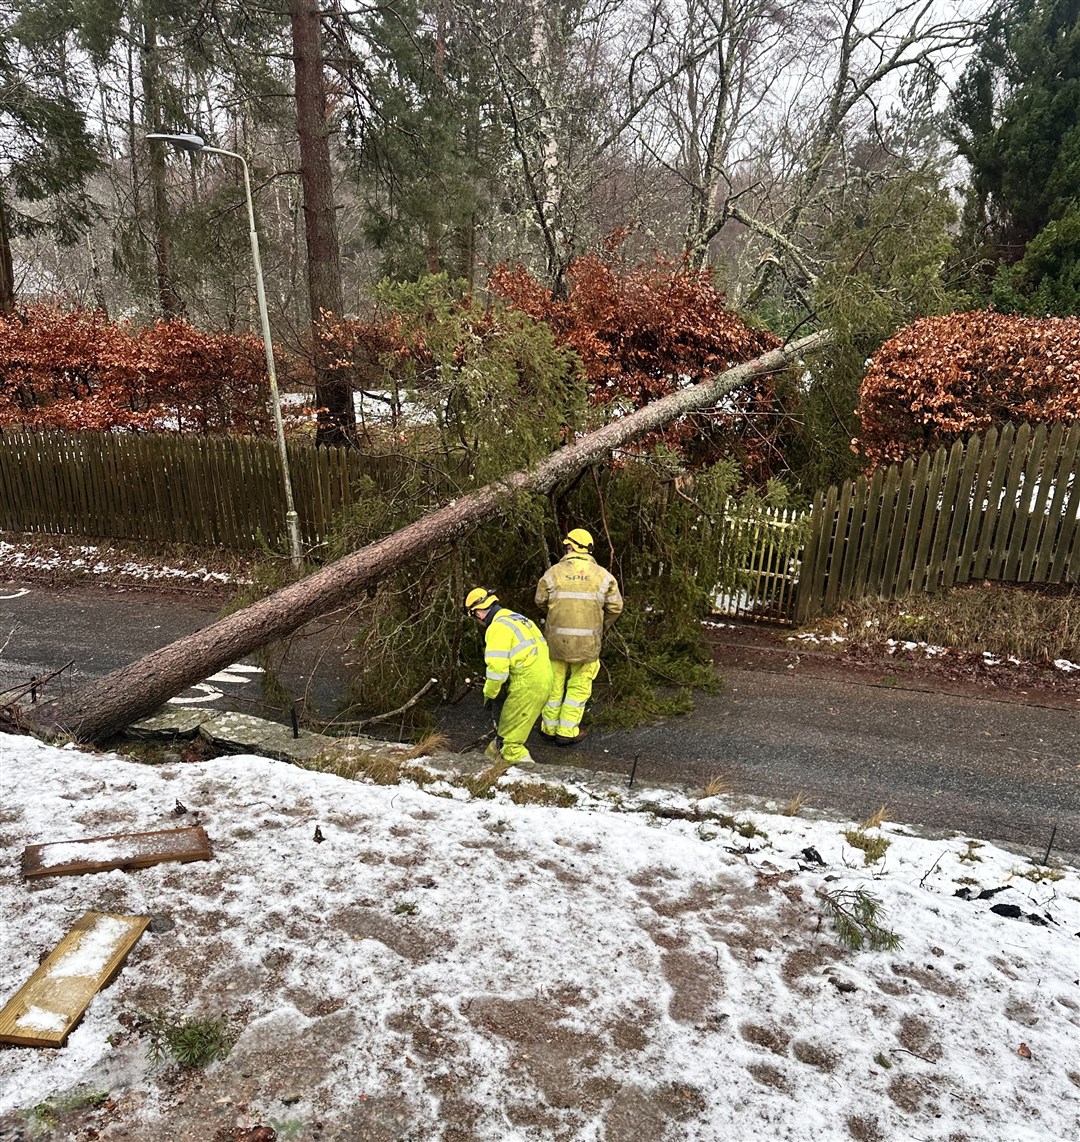 Workmen happened to be making their way to Ard Geal to work on a power failure caused by another fallen tree